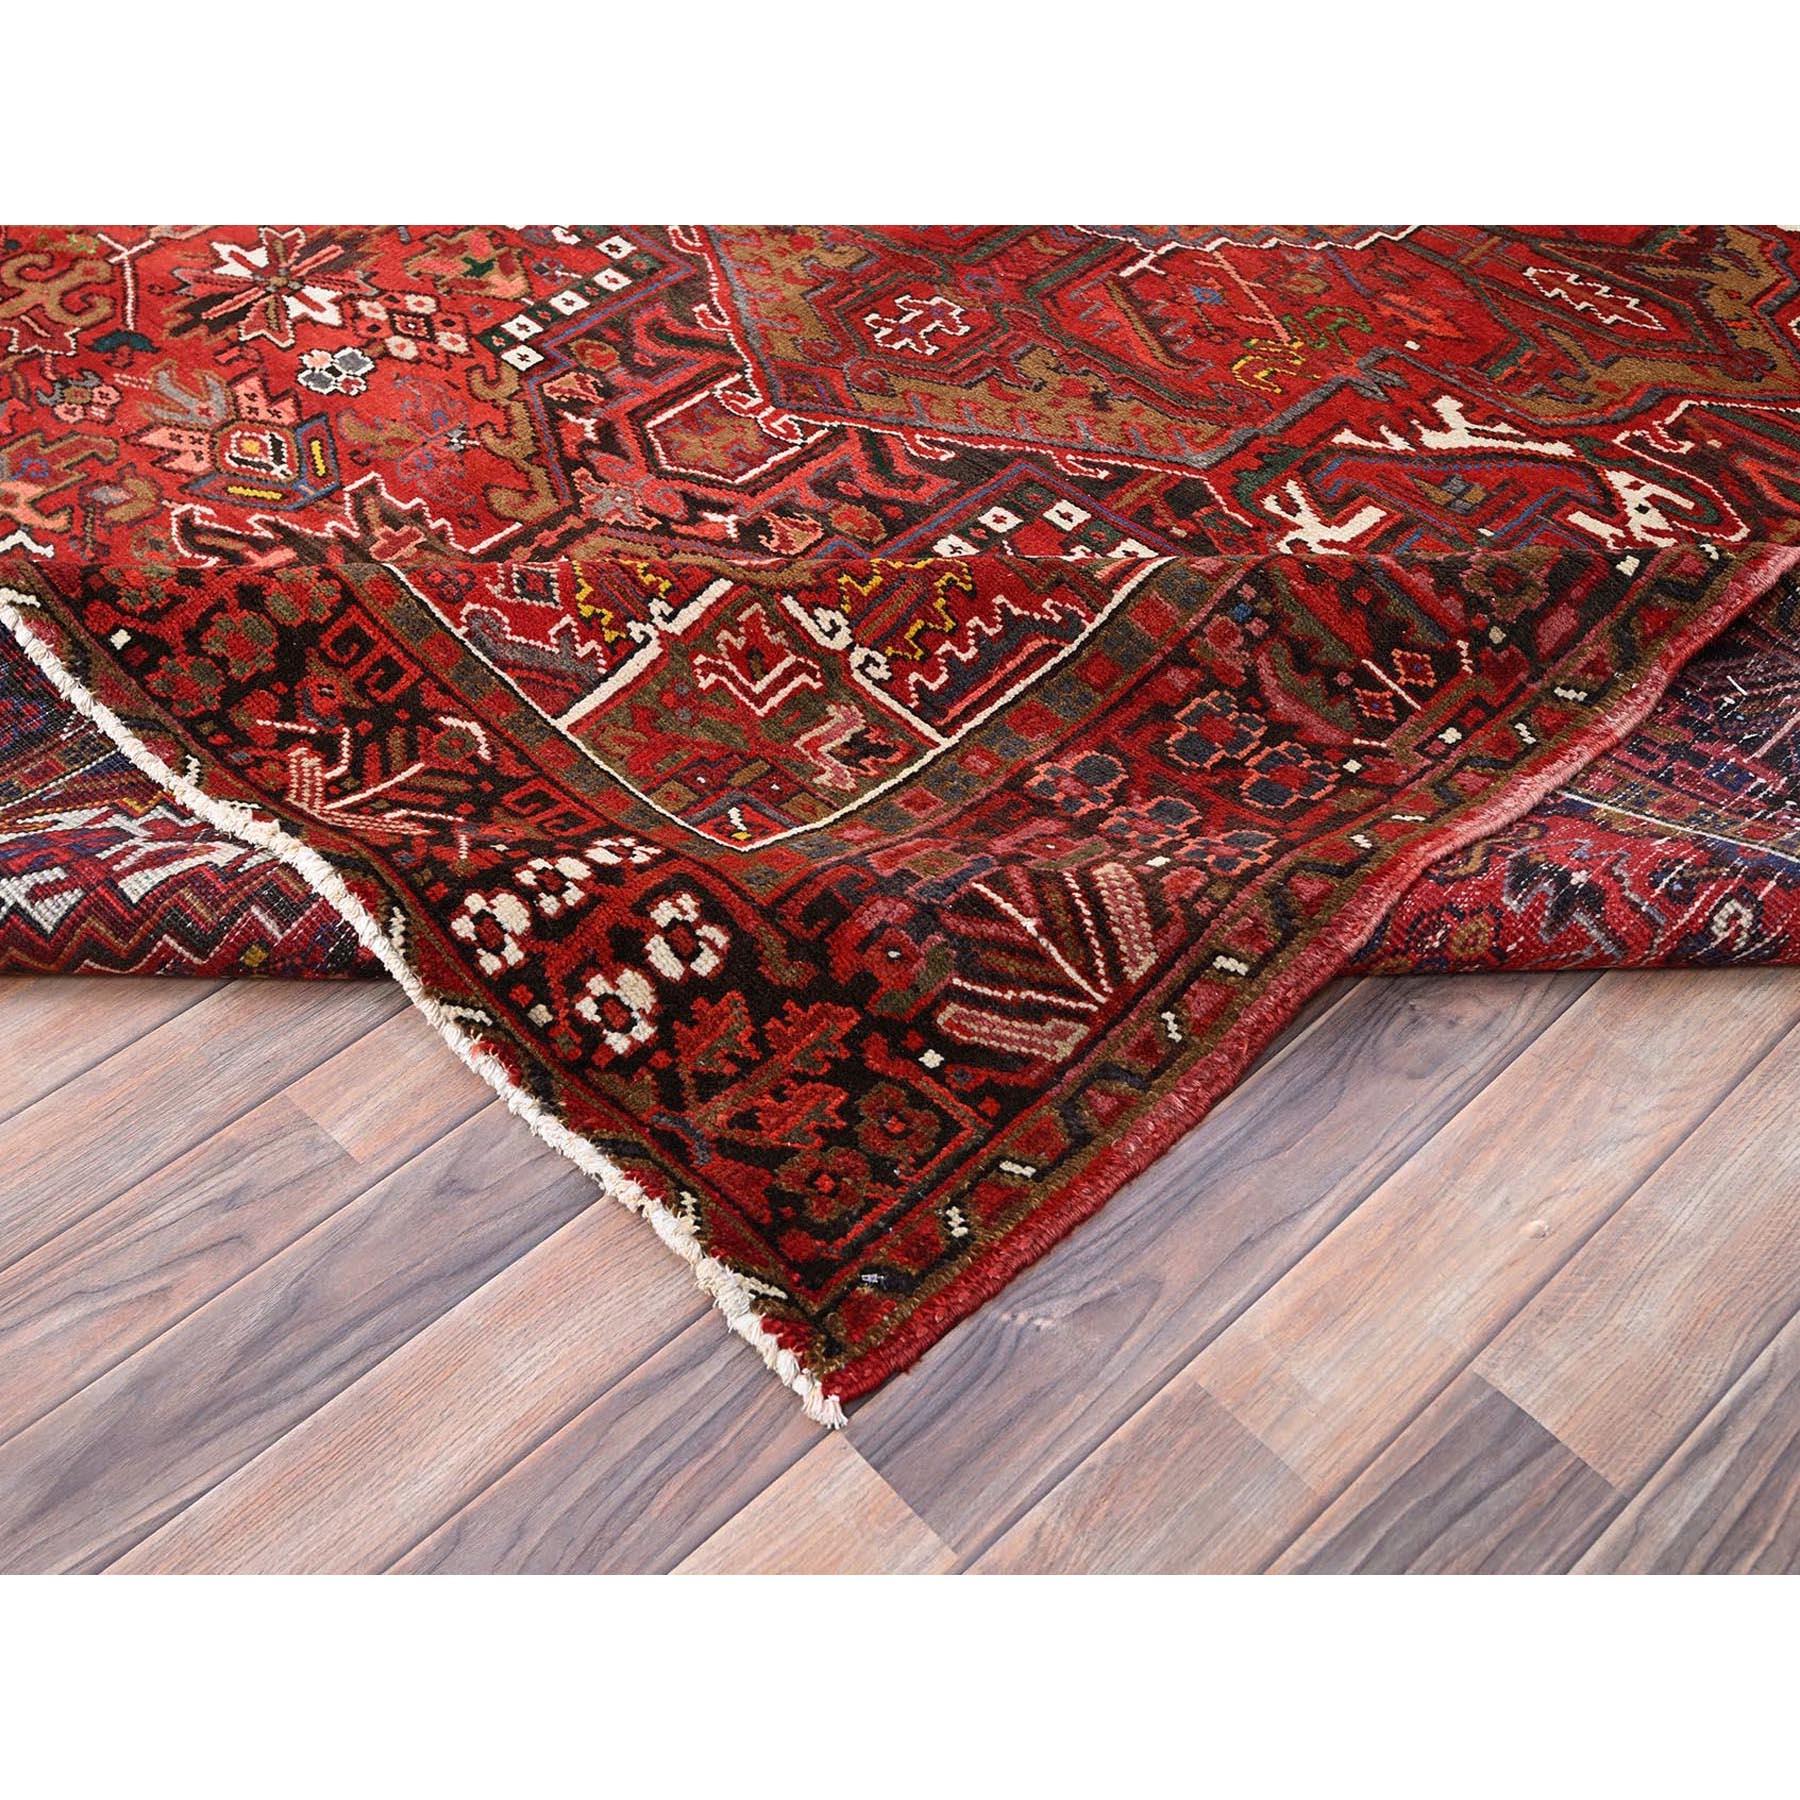 Imperial Red Semi Antique Persian Heriz Rustic Feel Worn Wool Hand Knotted Rug For Sale 2